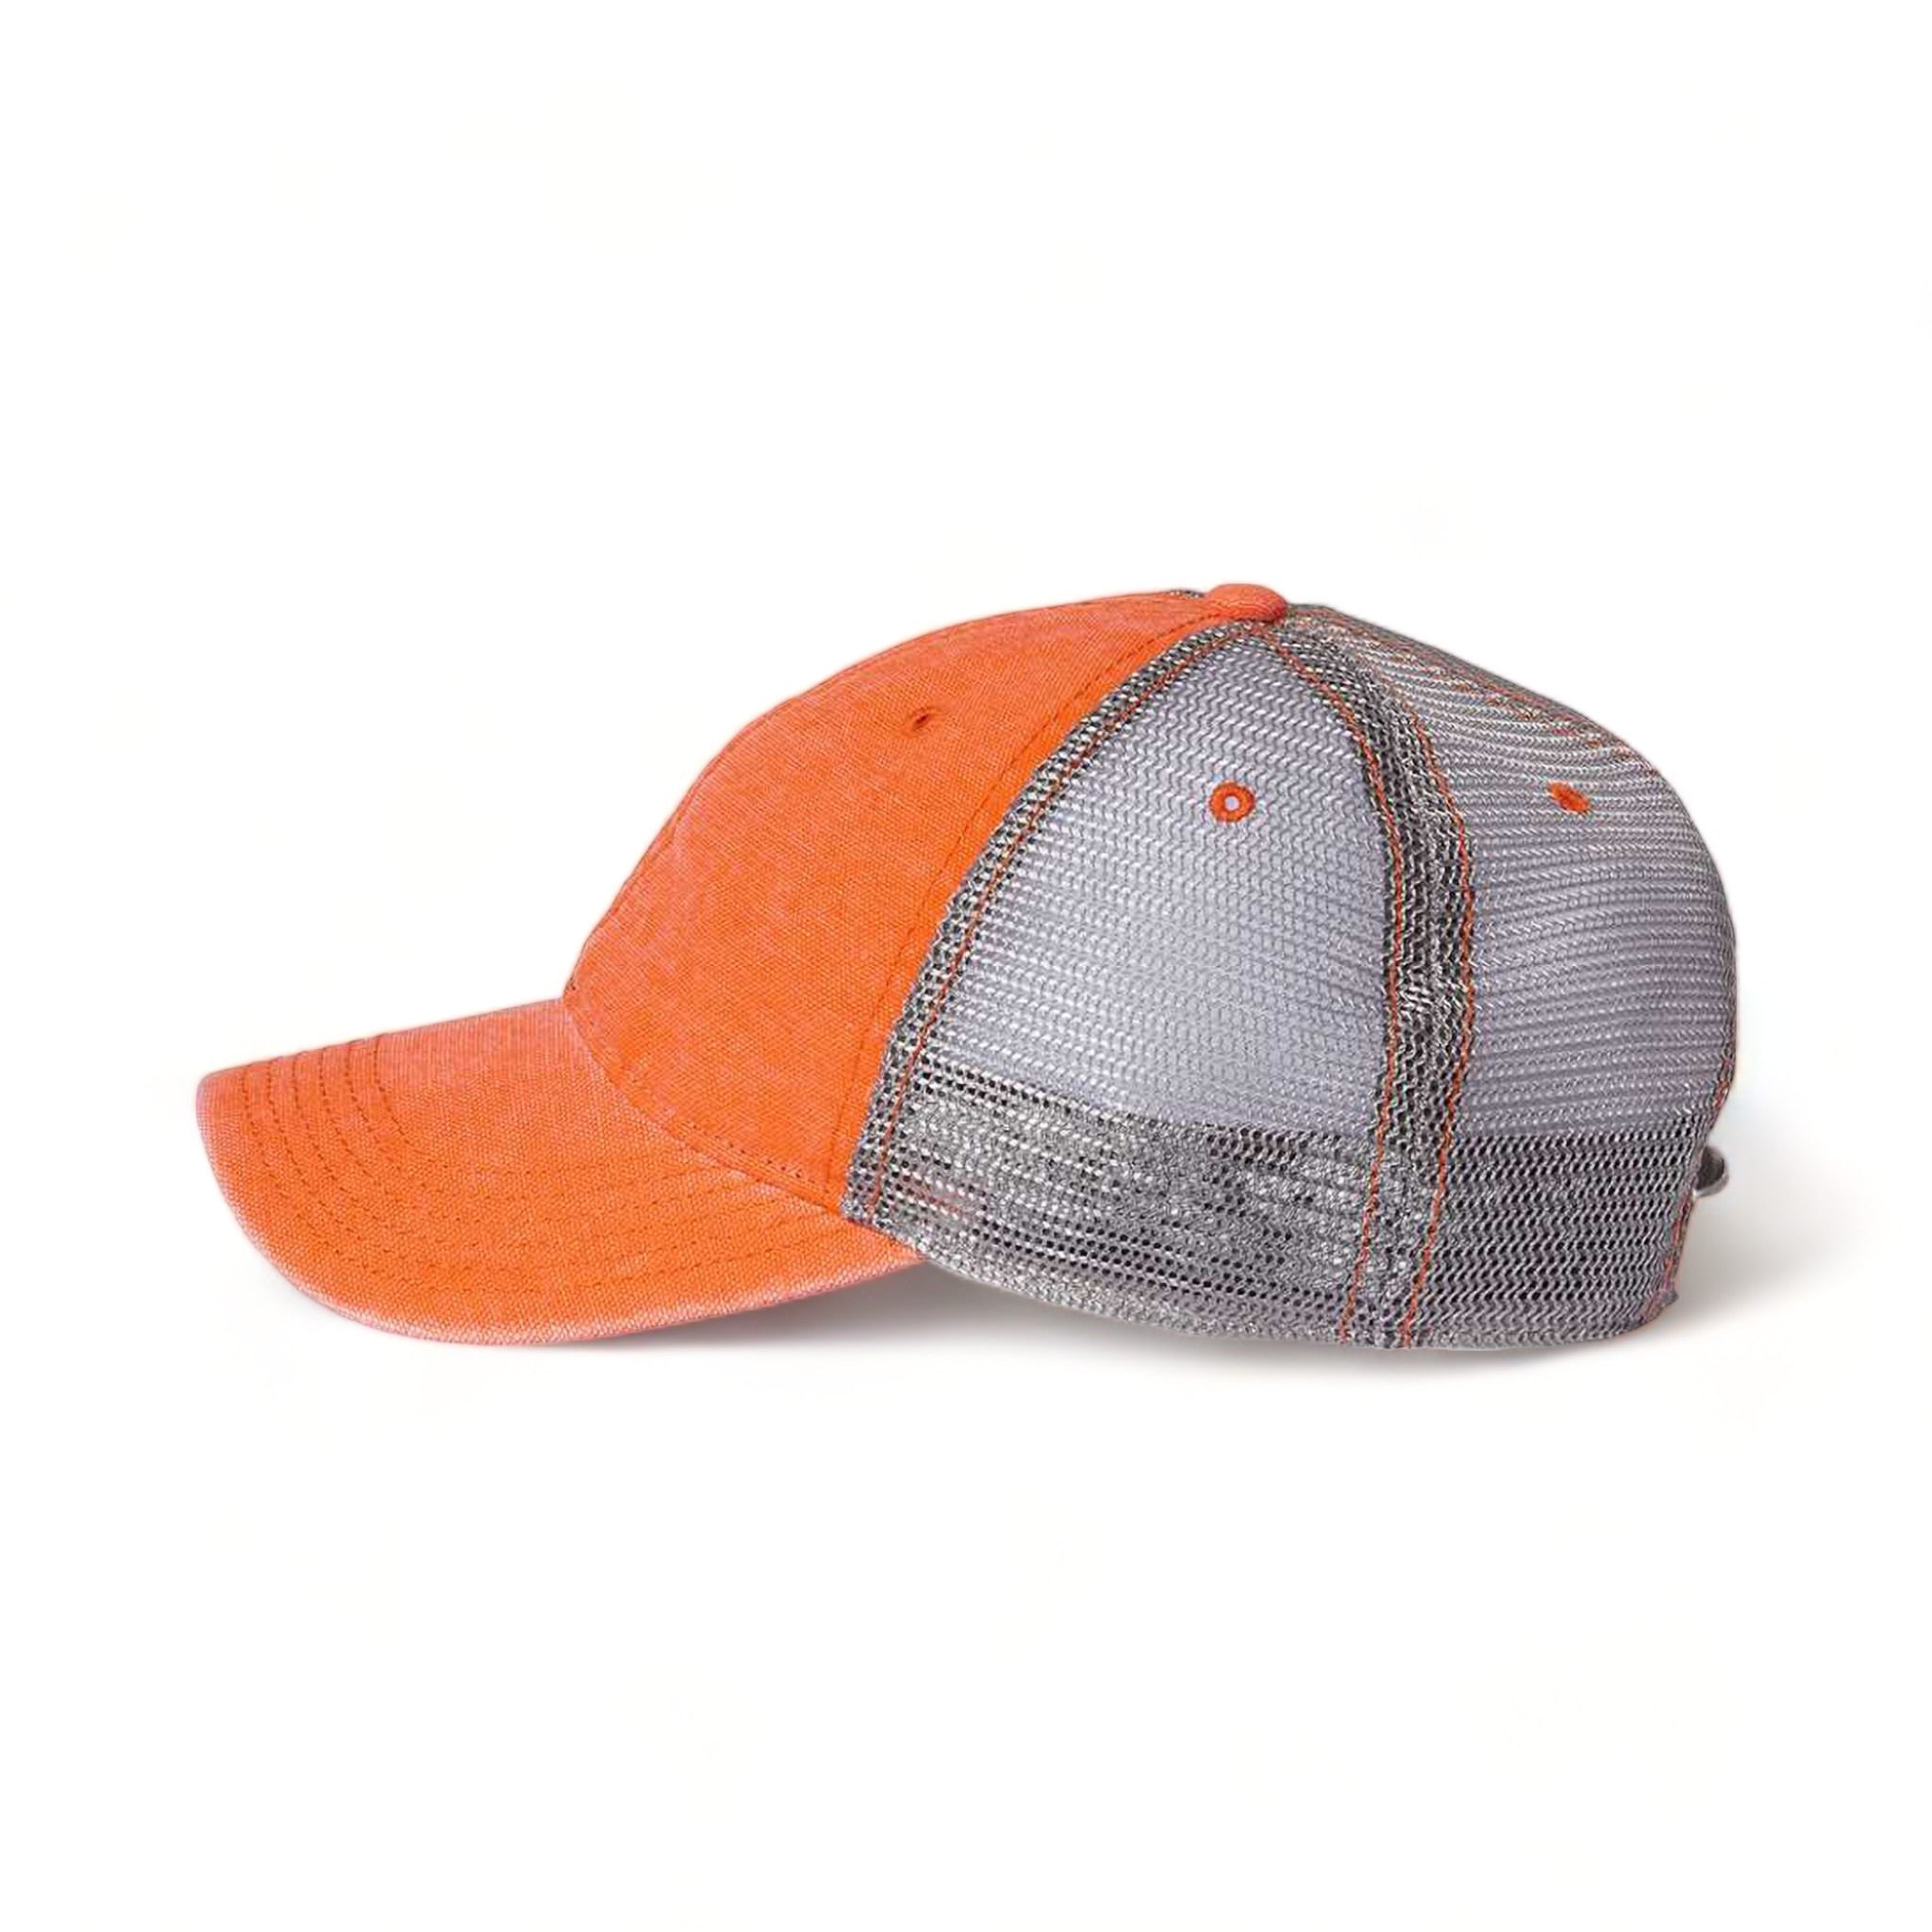 Side view of LEGACY DTA custom hat in orange and grey